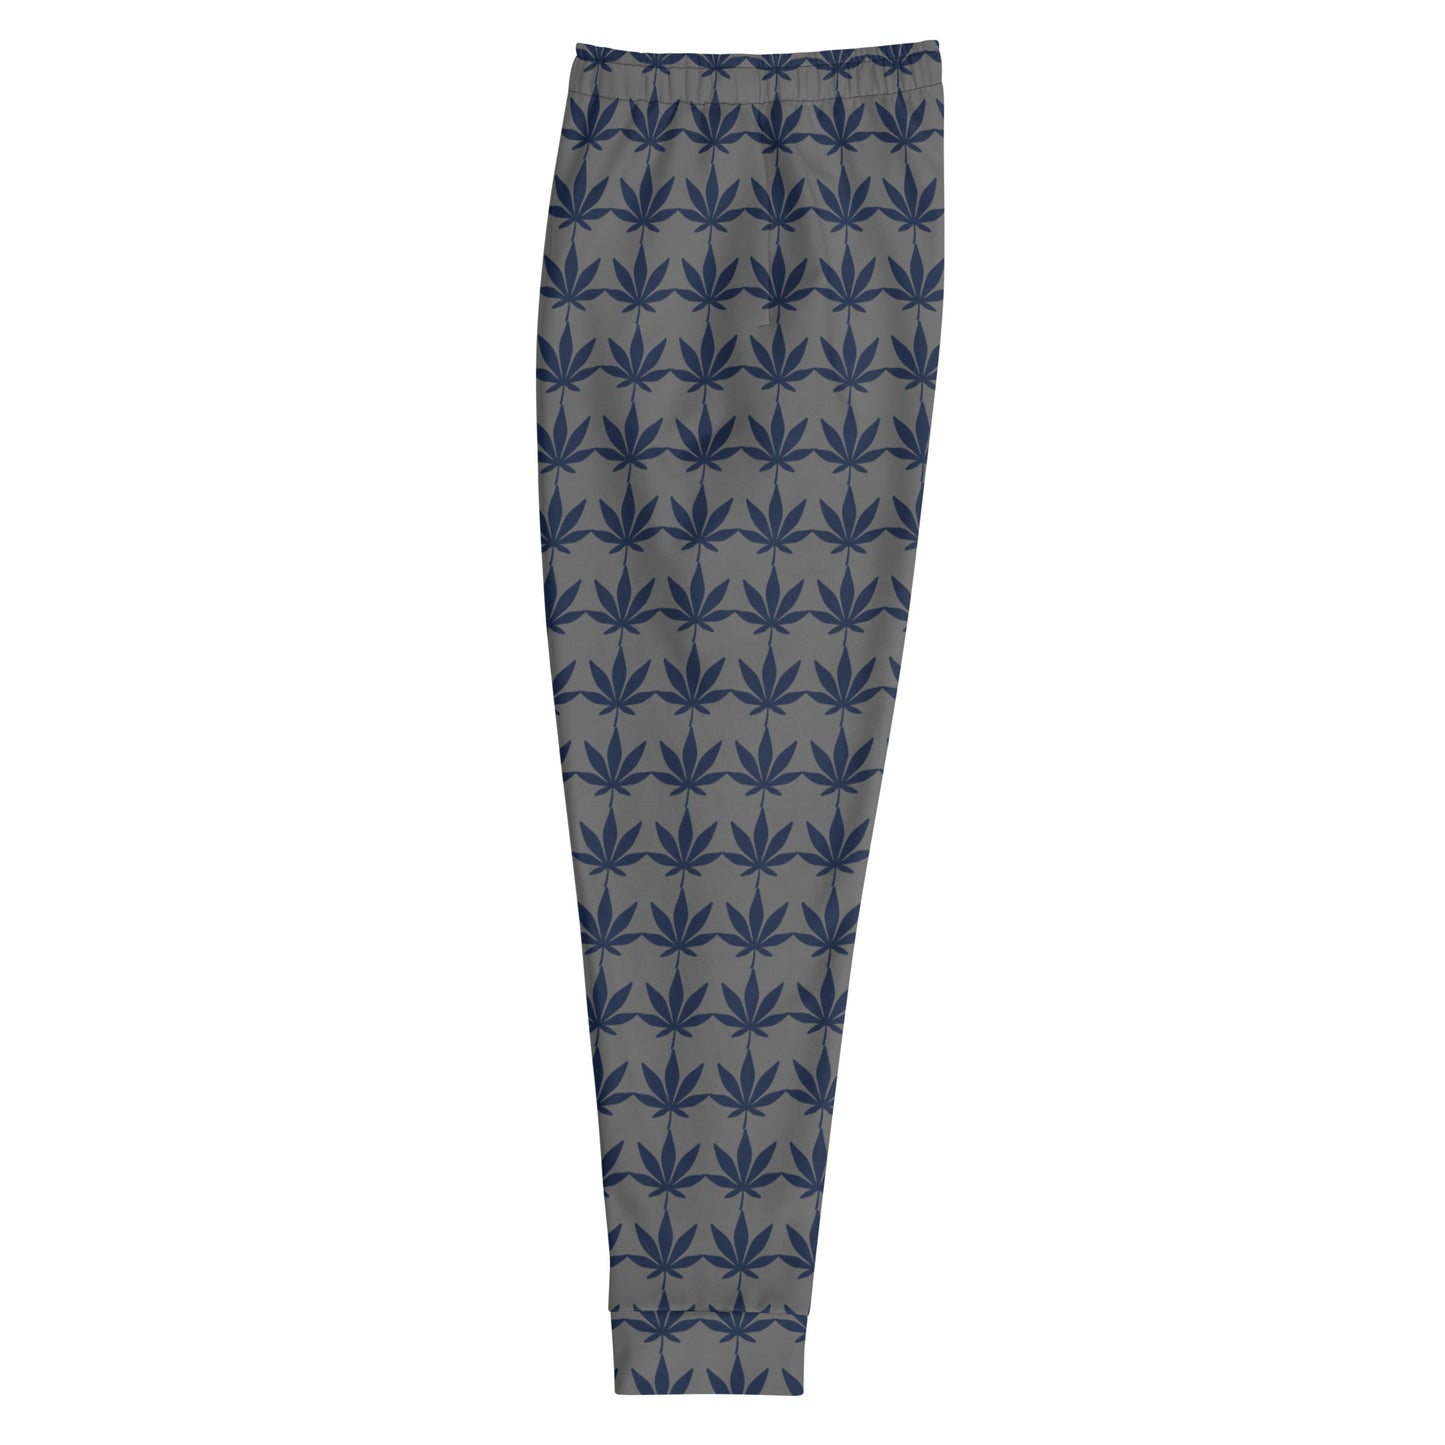 Gray And Navy Blue Men's Joggers